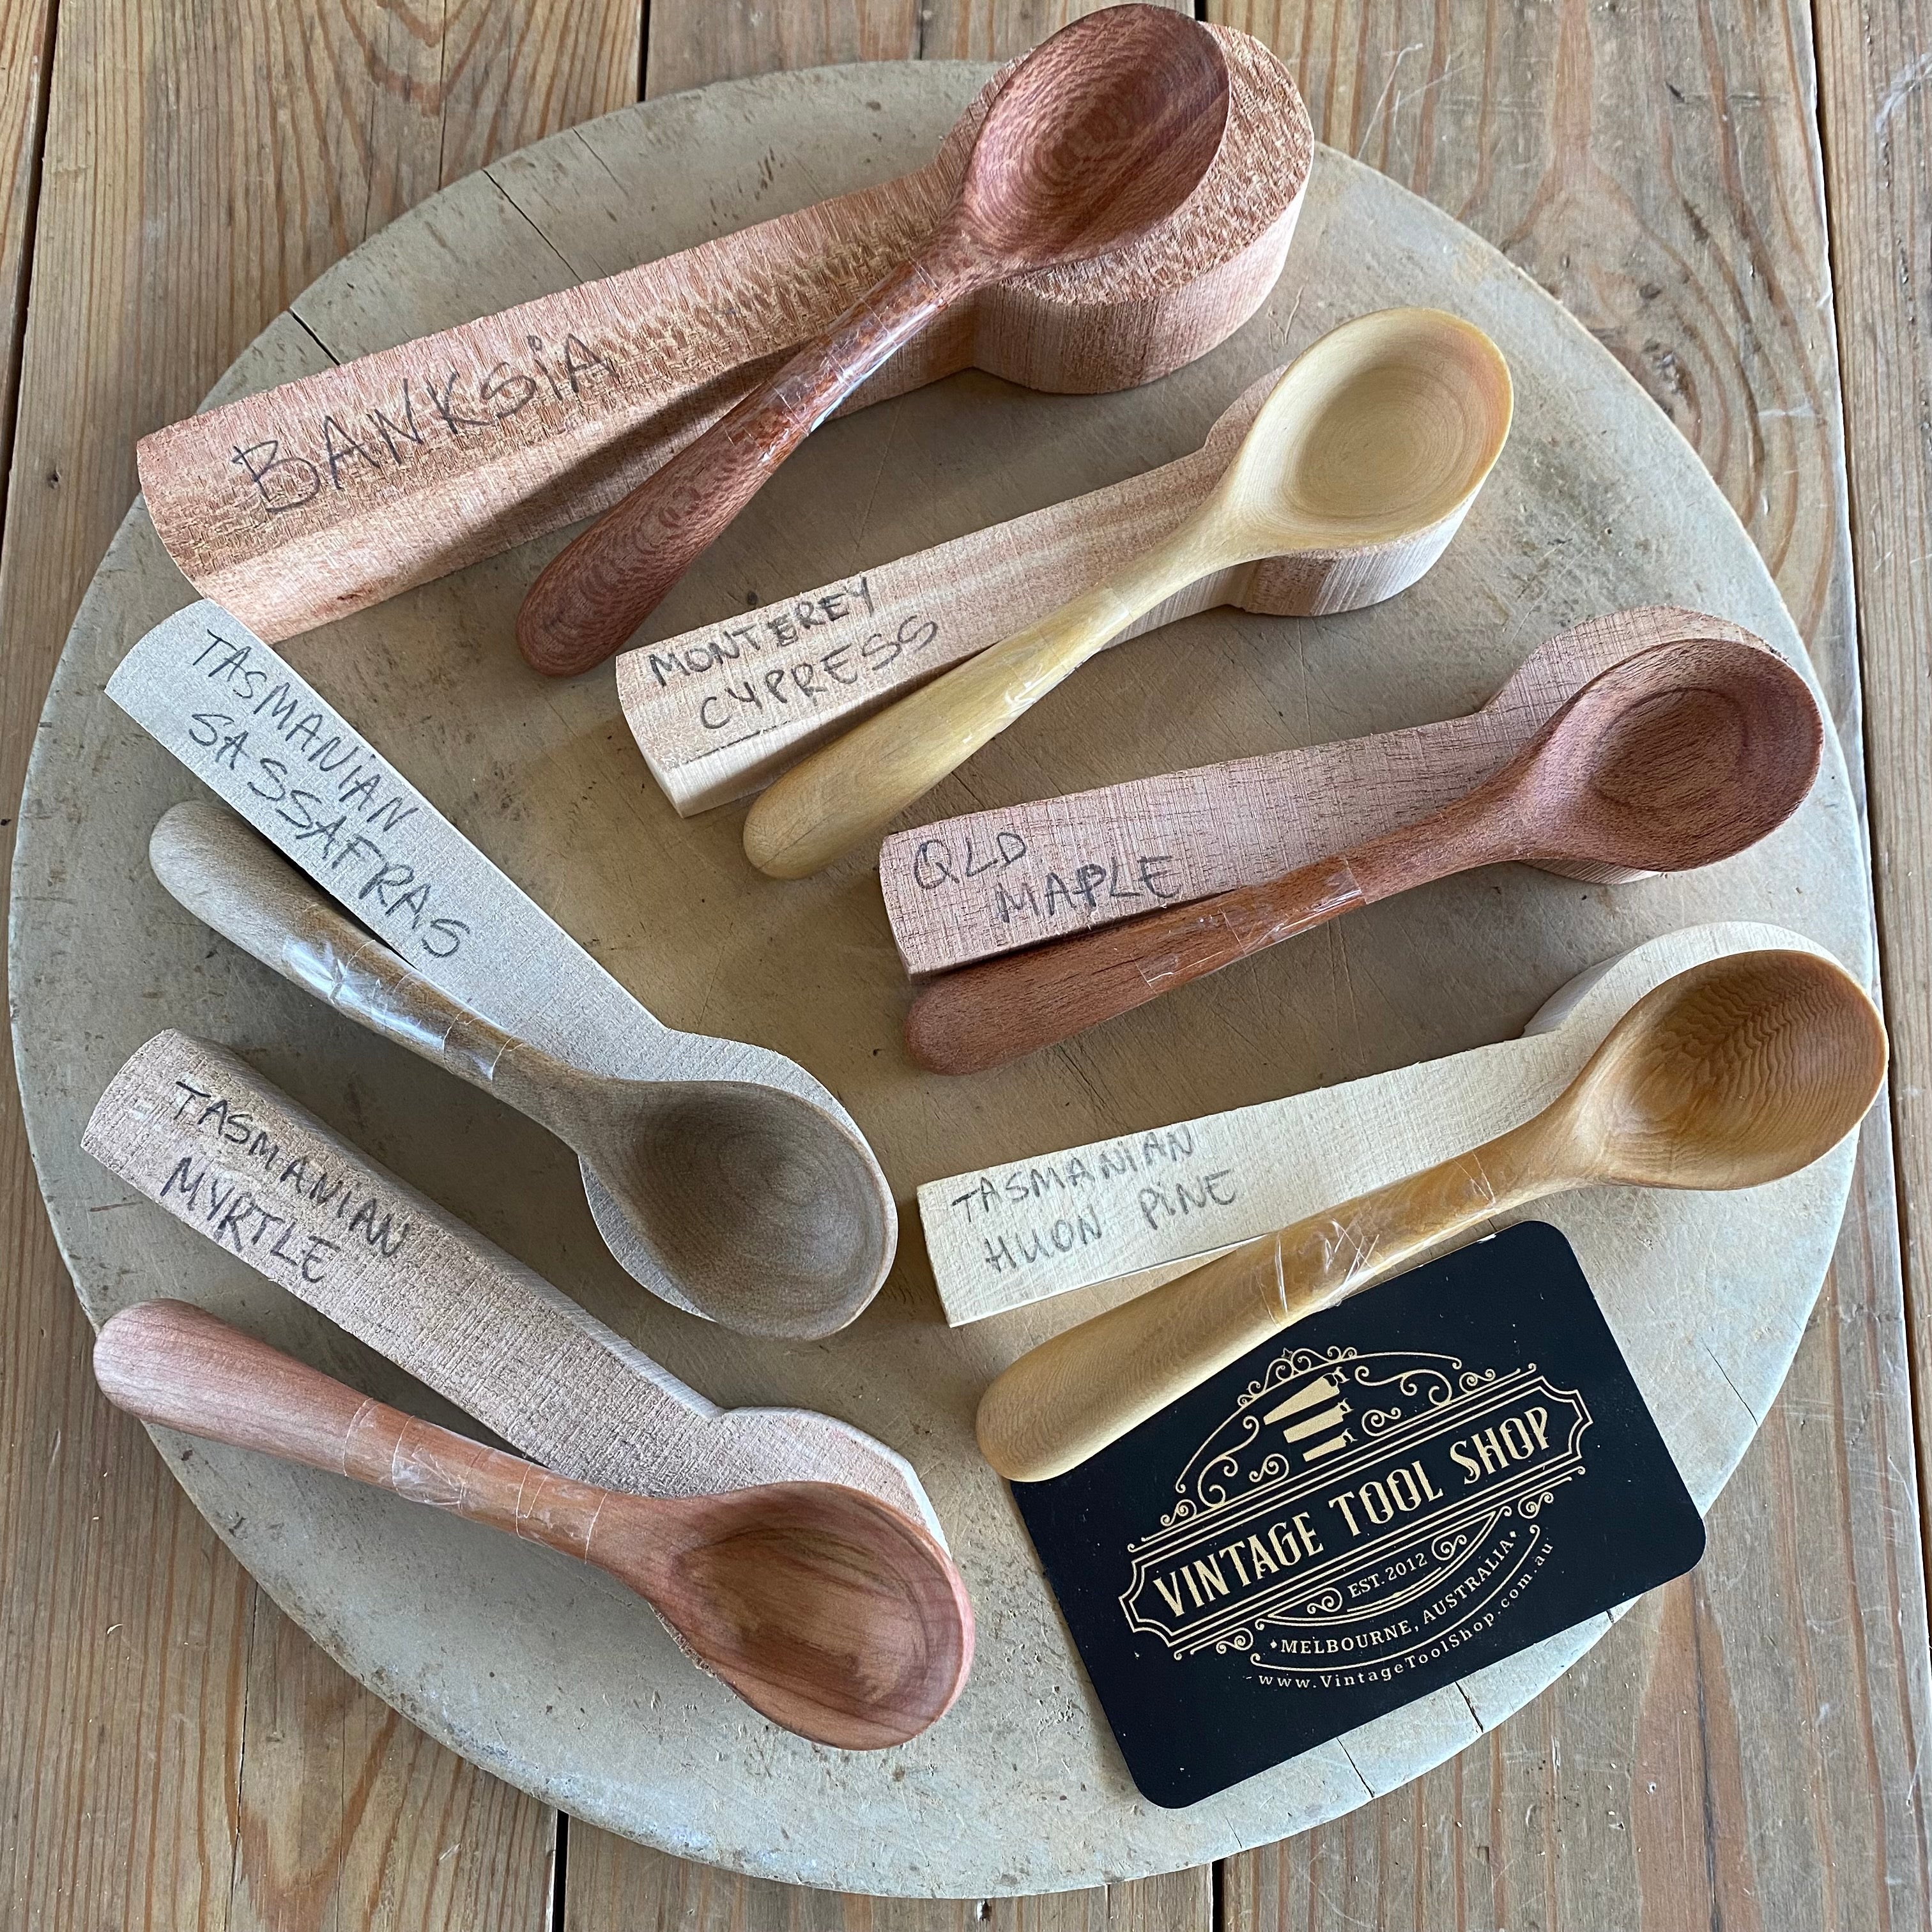 Wood for Carving - Blocks - Spoon Carving